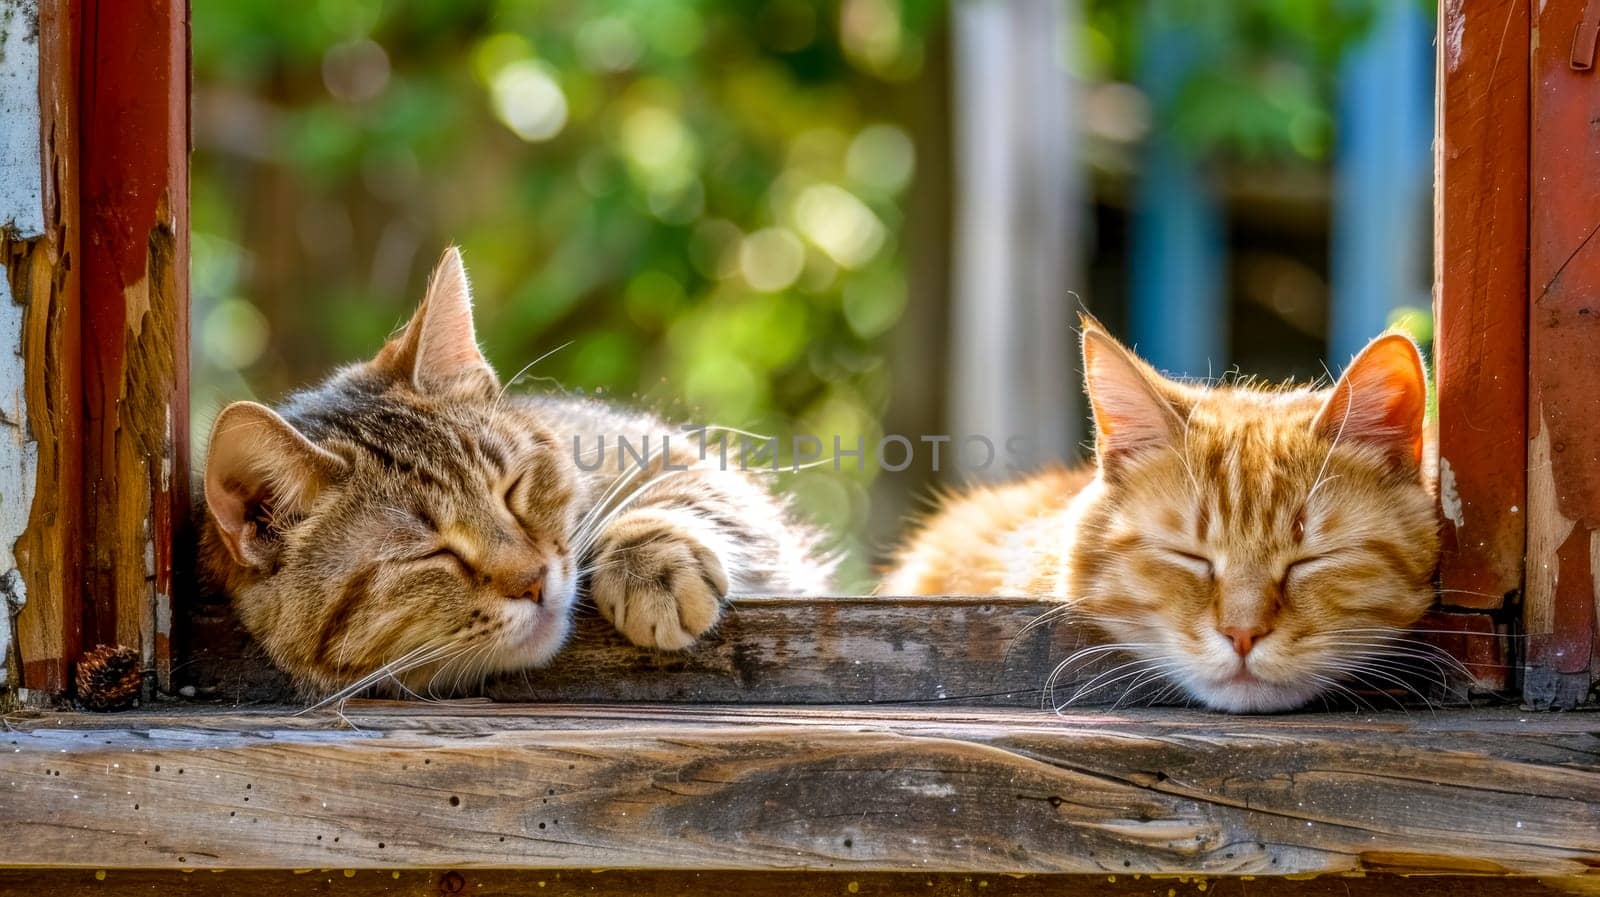 Serene slumber - two cats napping peacefully by Edophoto